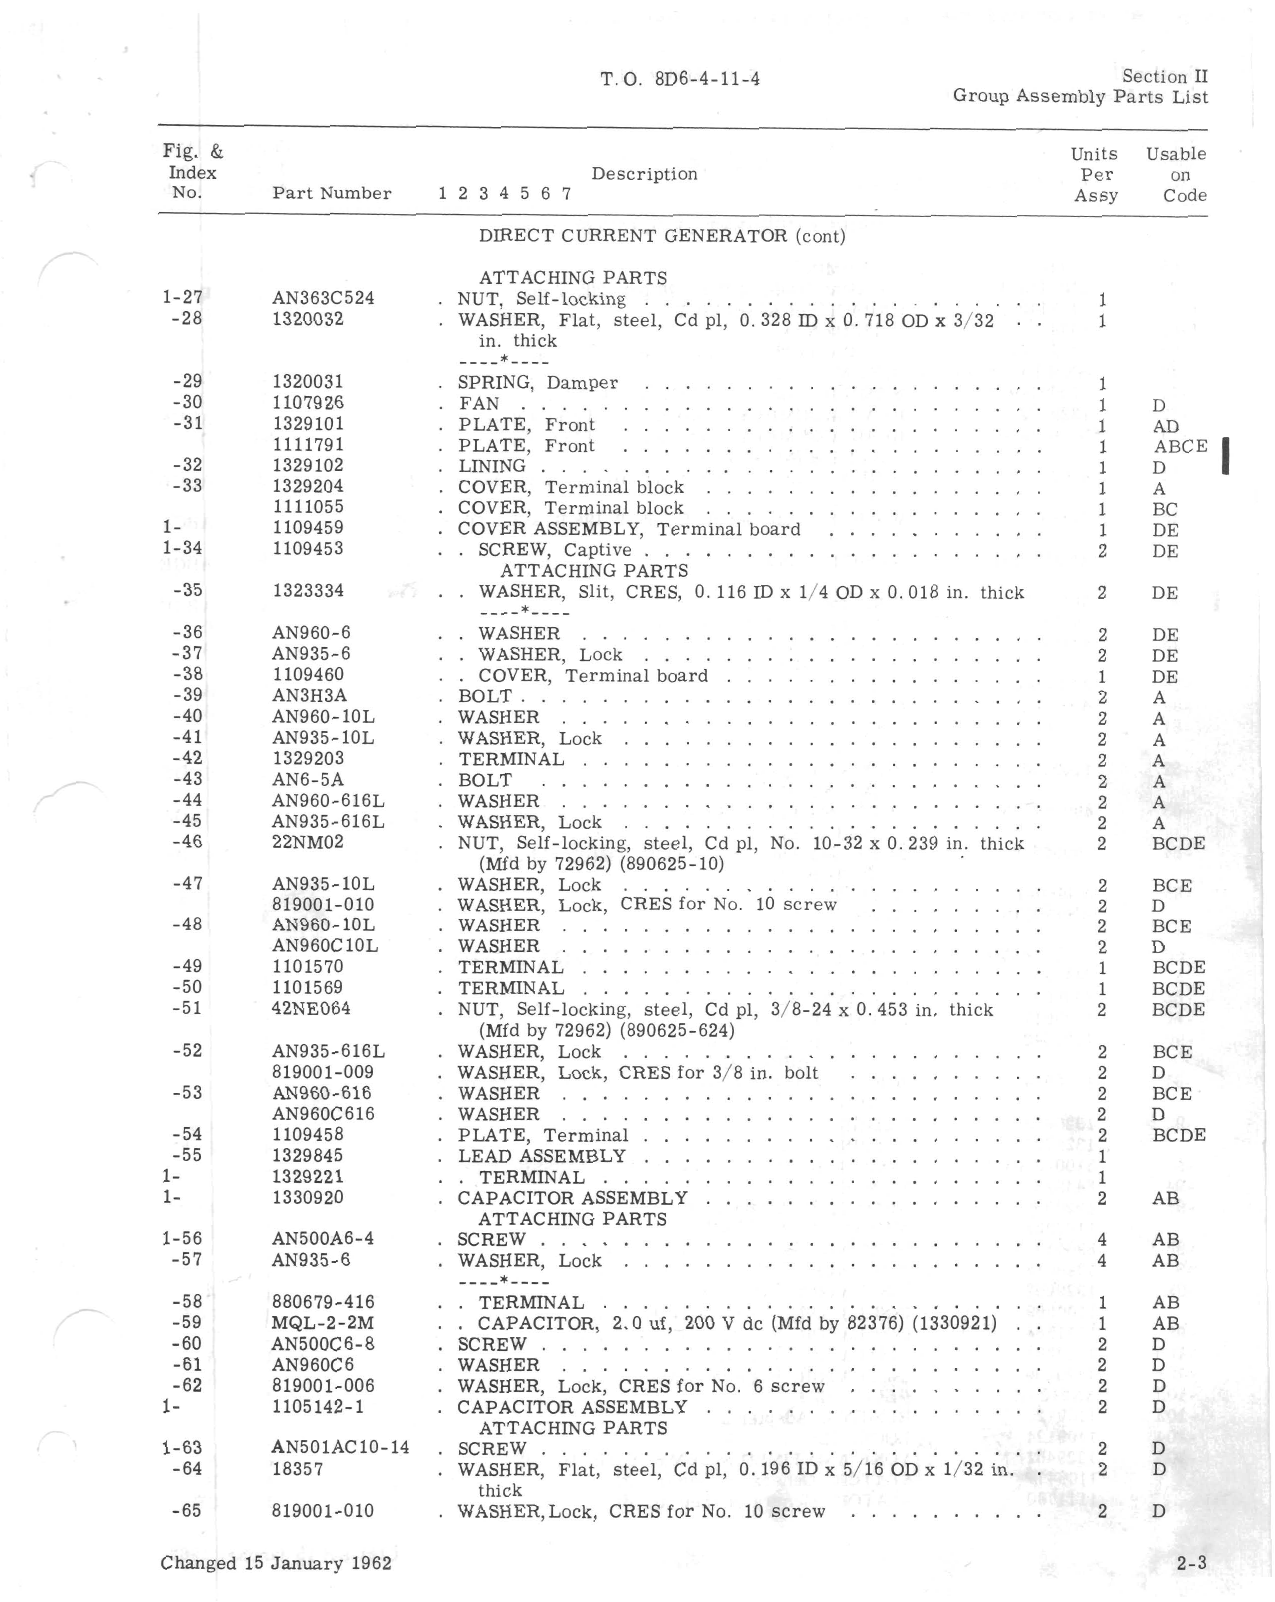 Sample page 5 from AirCorps Library document: Illustrated Parts Breakdown for Direct Current Generator - Types 30E20-1-A, 30E20-5-A, 30E20-5-B, 30E20-19-A, and 30E20-33-B